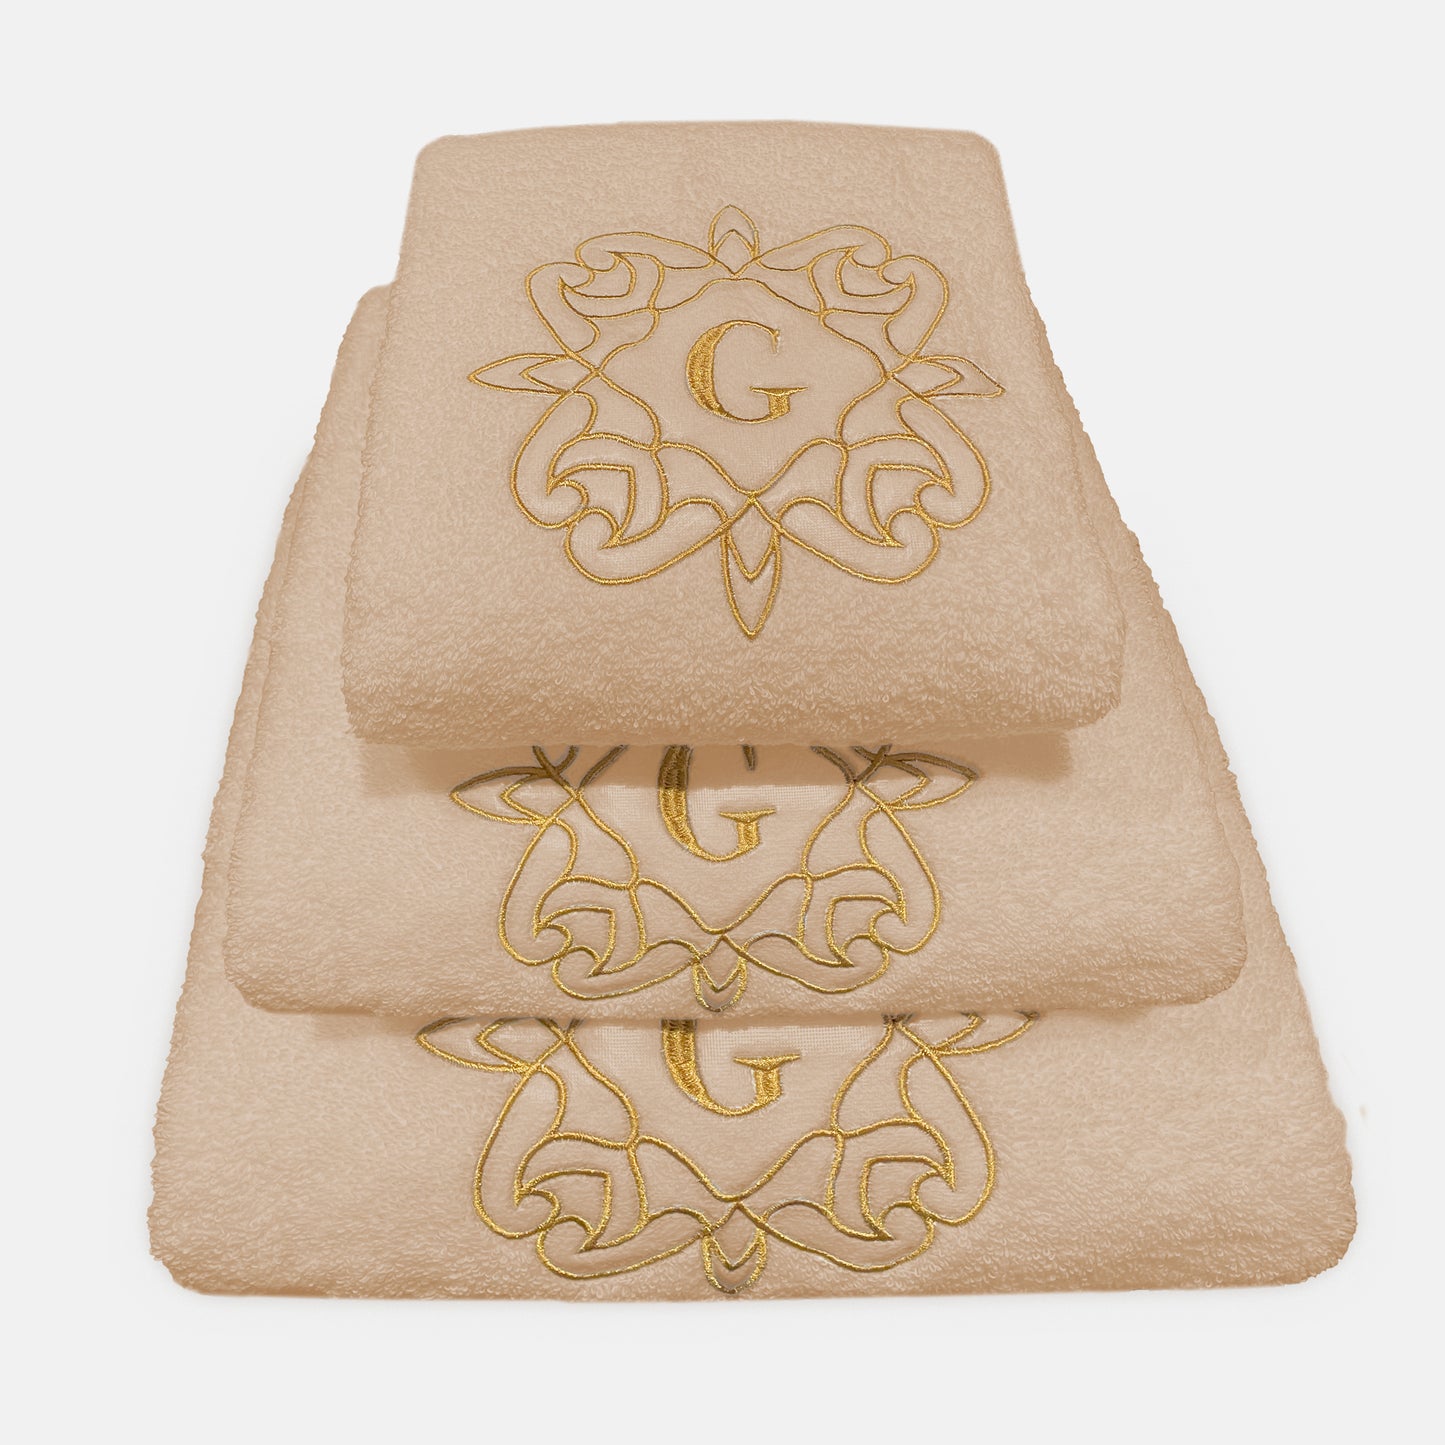 Initial(s) Gold Embroidery Luxury 100% Turkish Cotton Towel Sets (Sand Color)